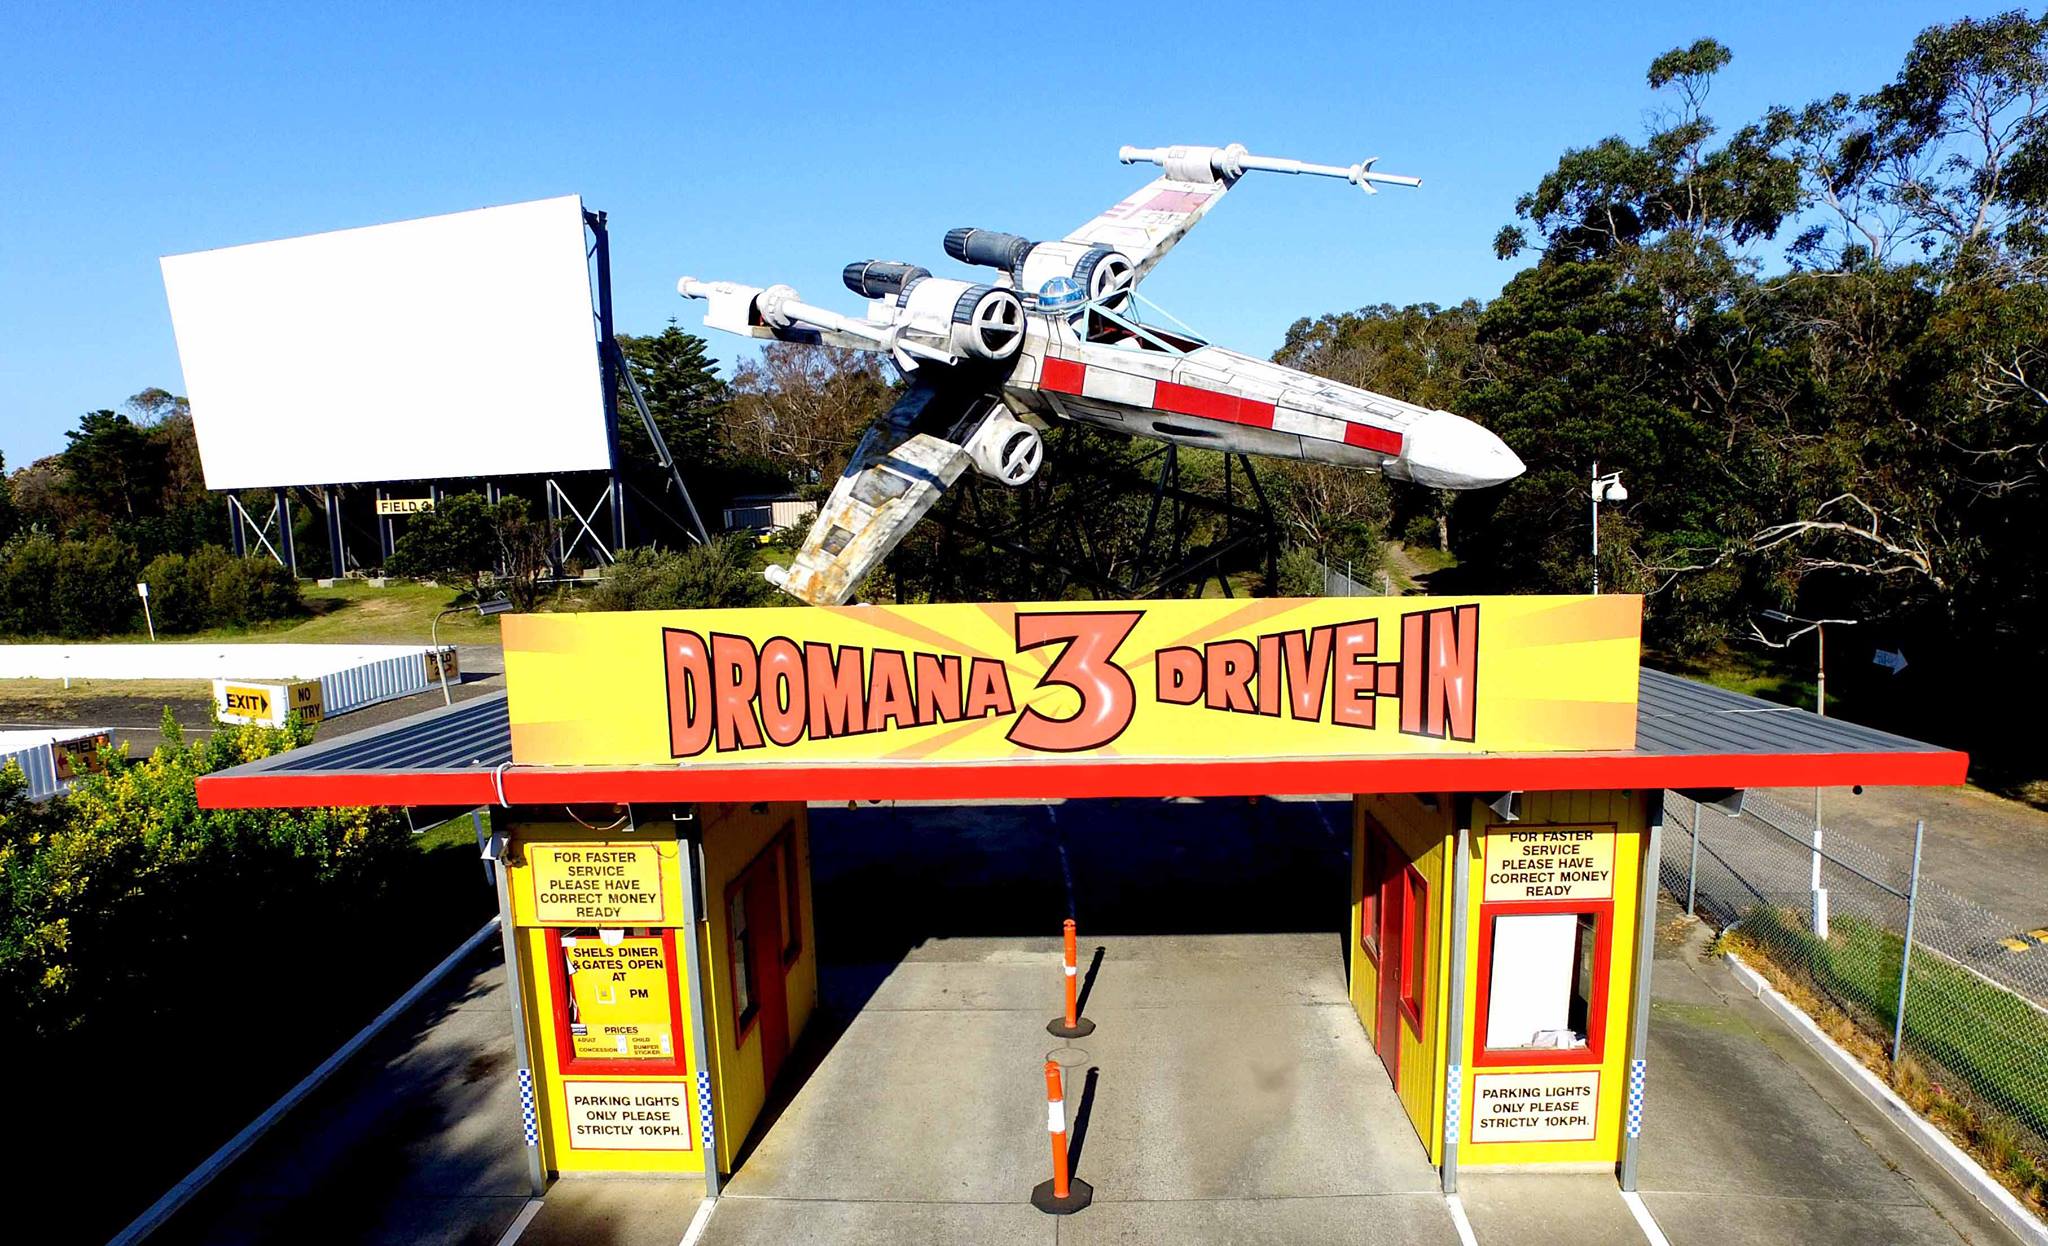 The front of the Dromana 3 Drive-In.